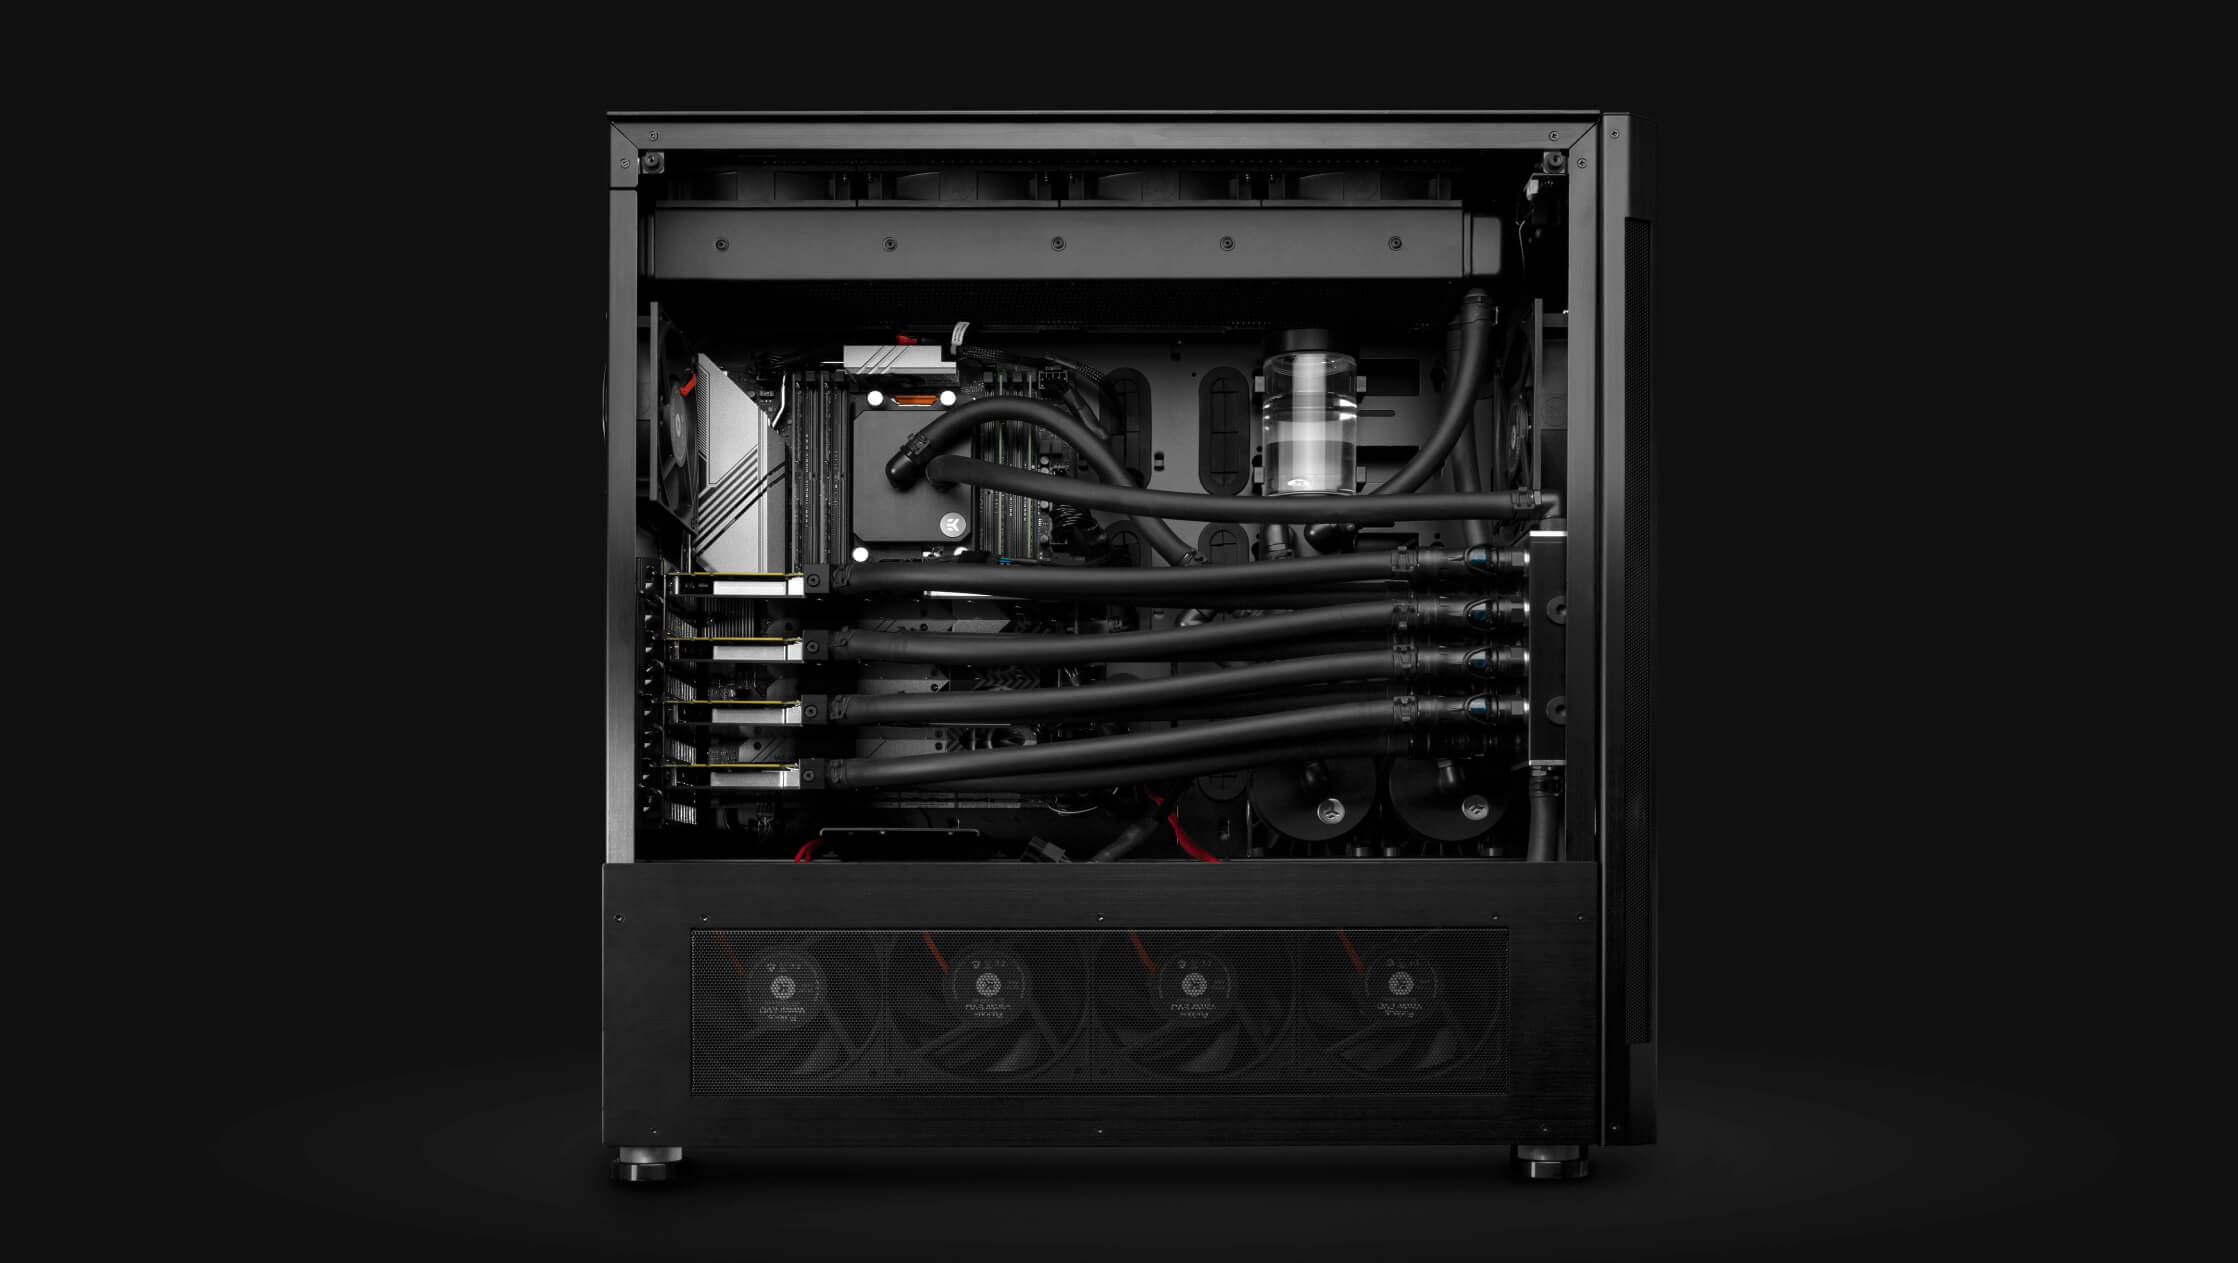 EK-Fluid Works Studio Series S5000 workstation with 4 GPUs and high-performance CPU – well beyond Unreal Engine hardware requirements